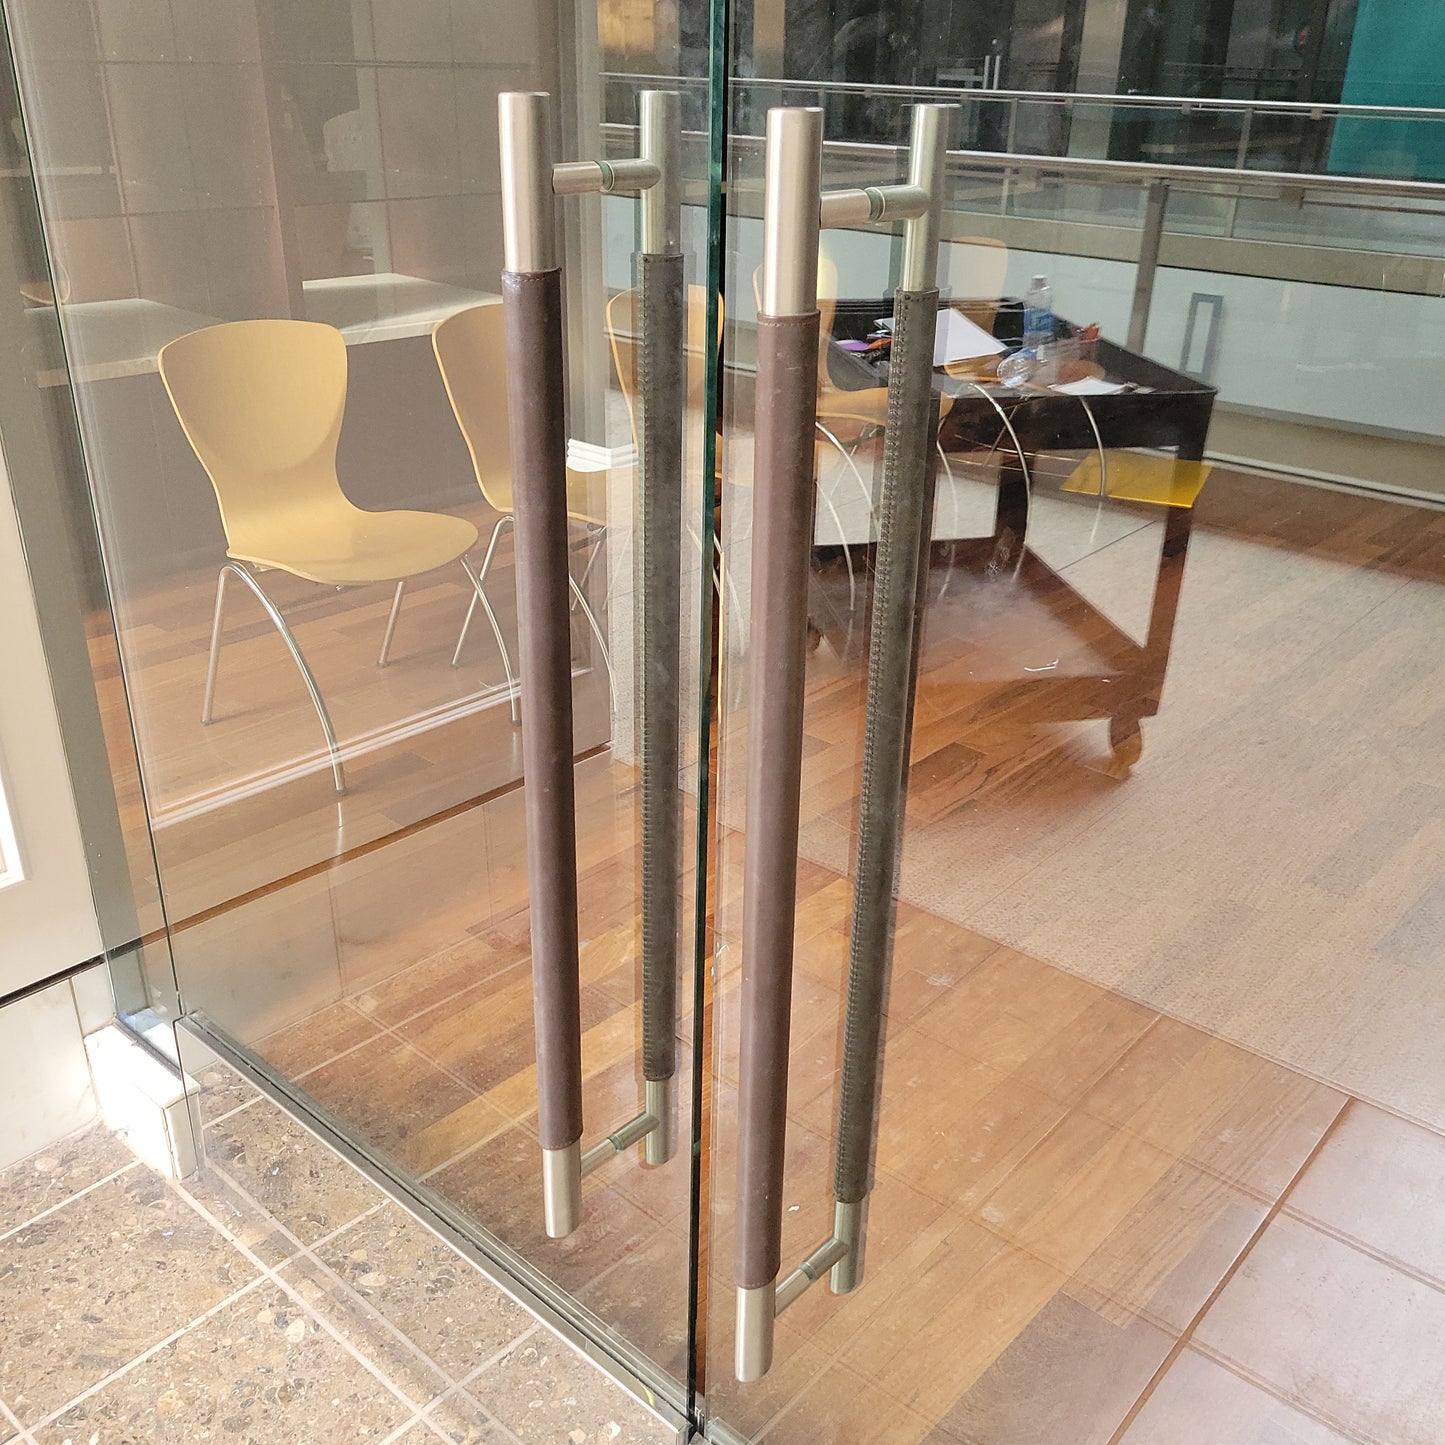 Tall glass entry doors